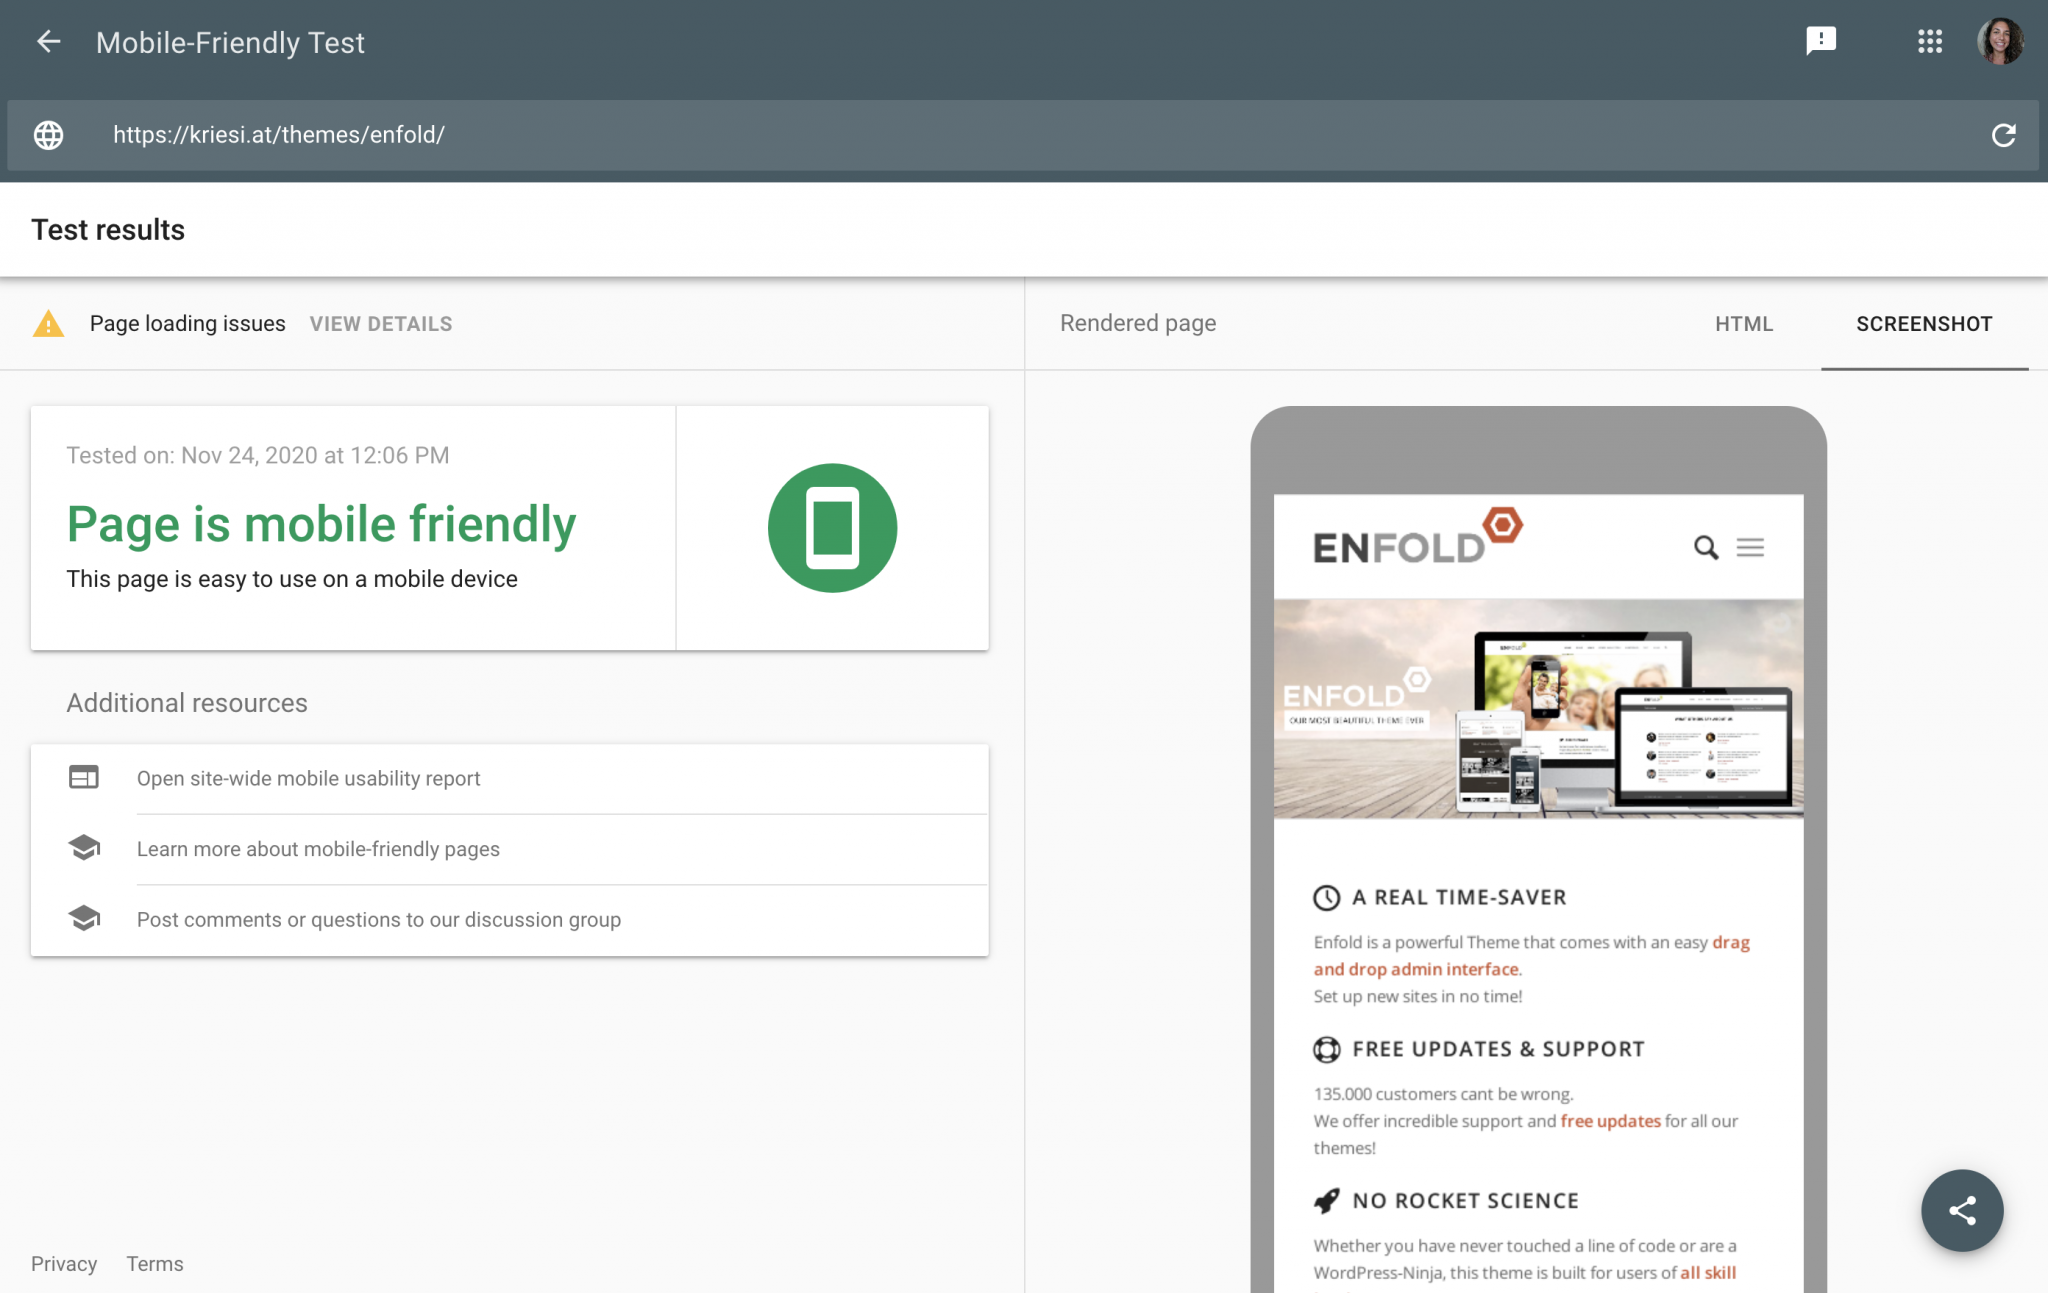 Google Mobile-Friendly Test for the responsive check of Enfold theme